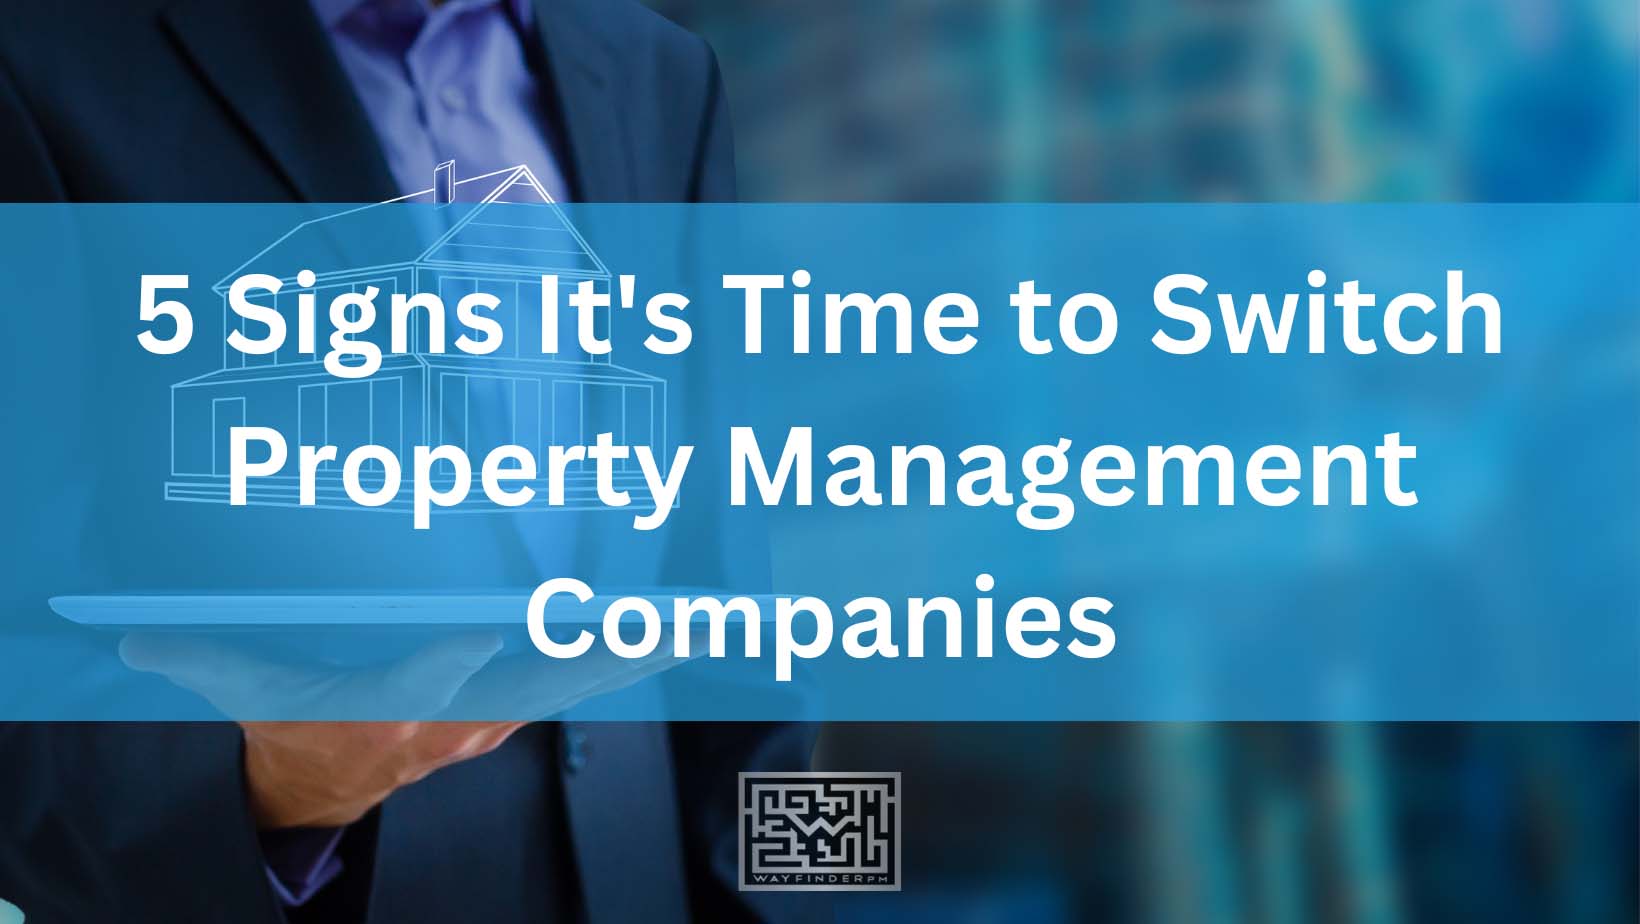 5 Signs It's Time to Switch Property Management Companies